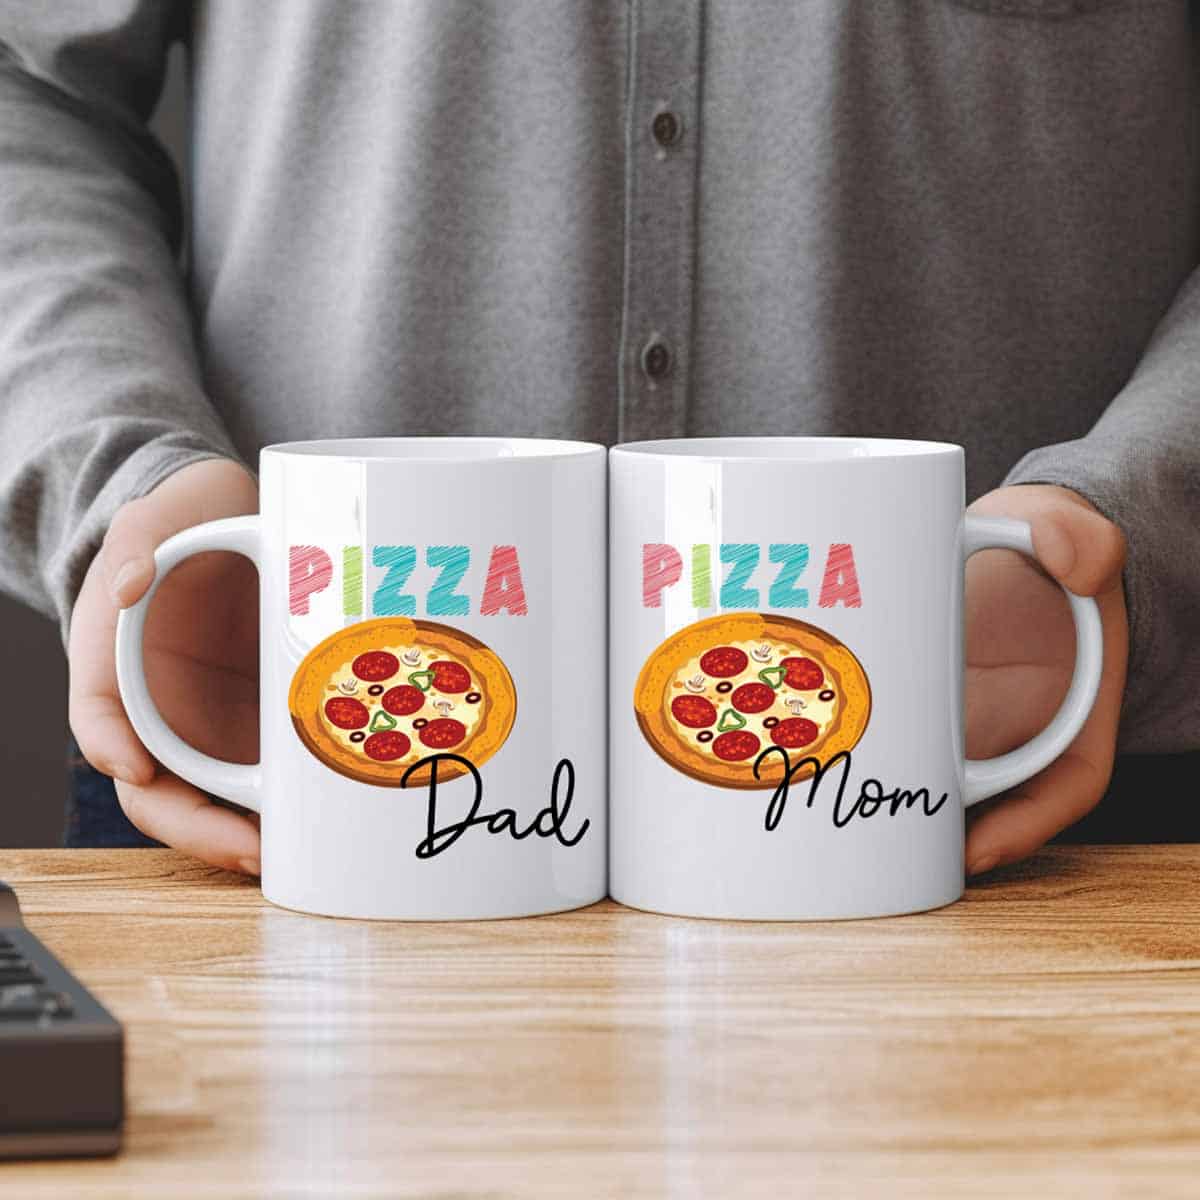 Two pizza mugs with one featuring pizza dad and the other featuring pizza mom.